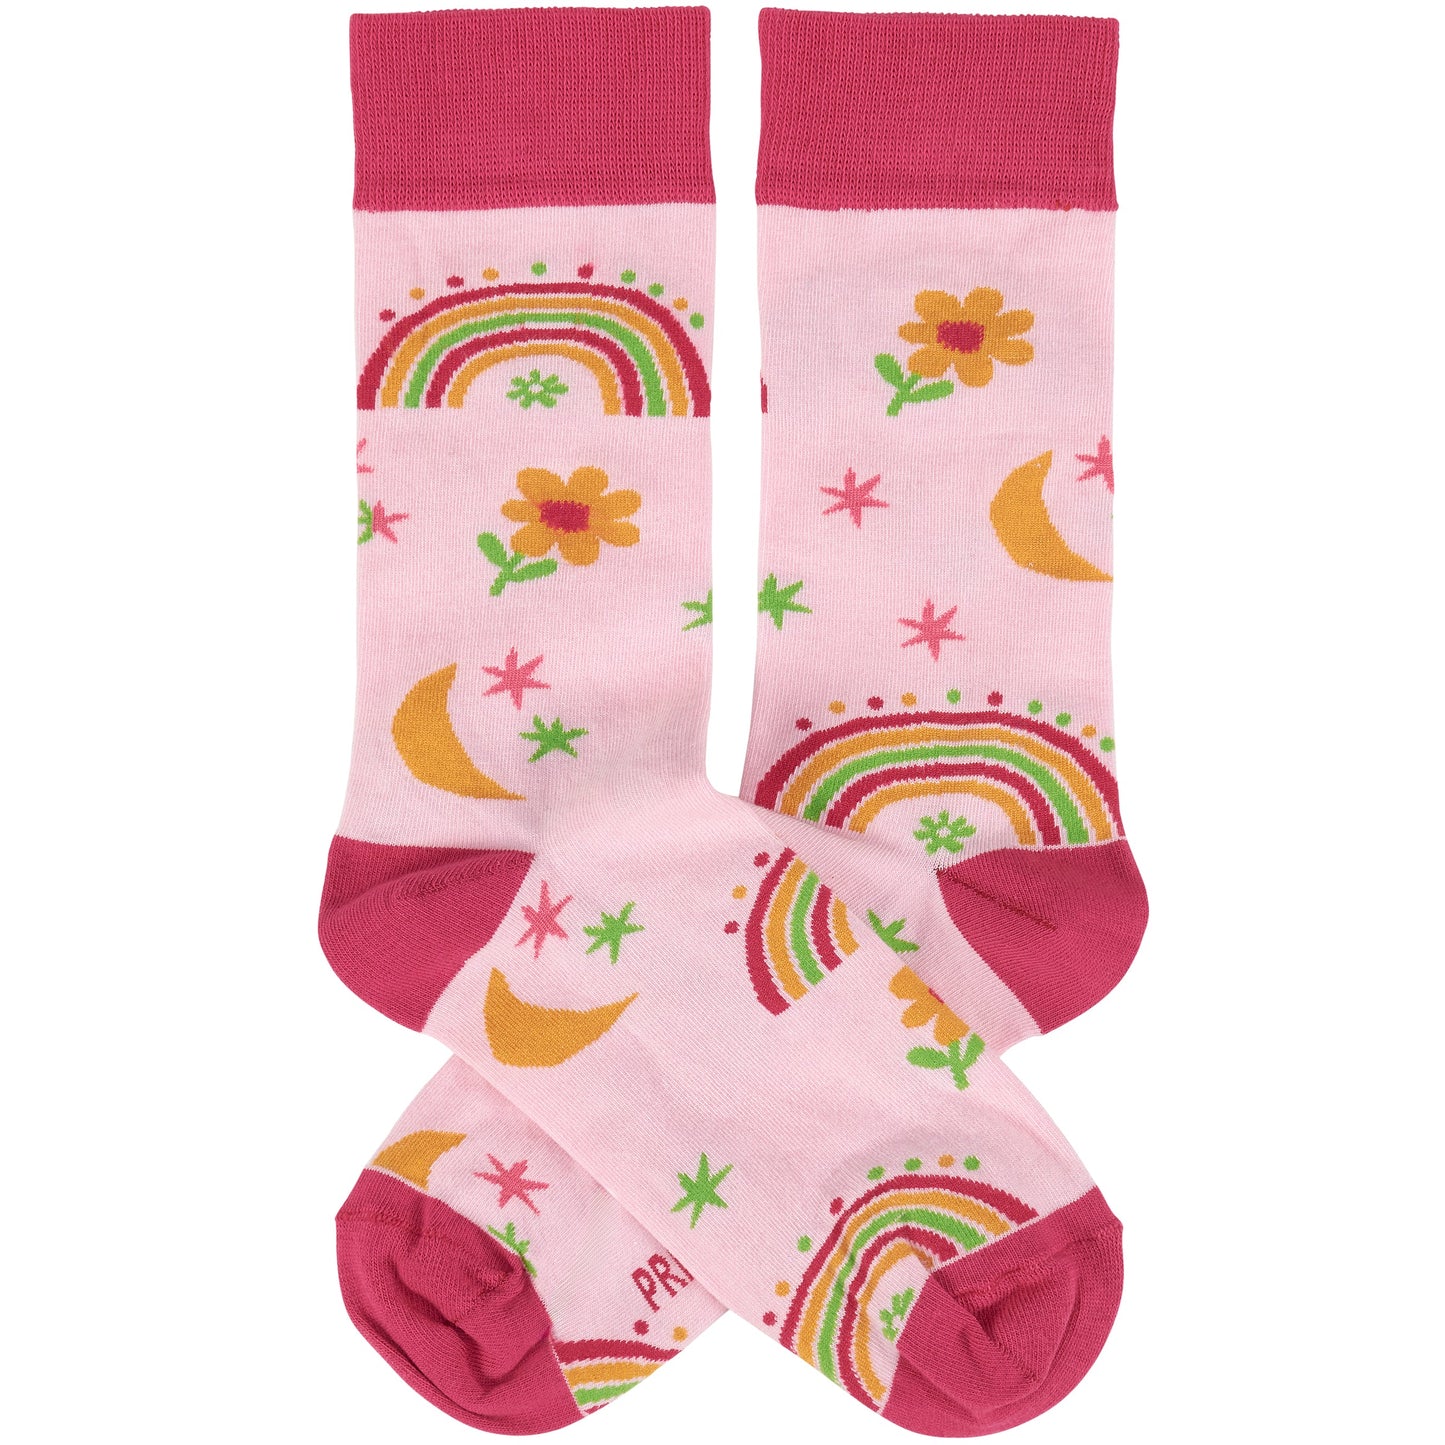 Rainbow and Flowers Socks on Pink Background | Women's Colorful Self-expression Socks